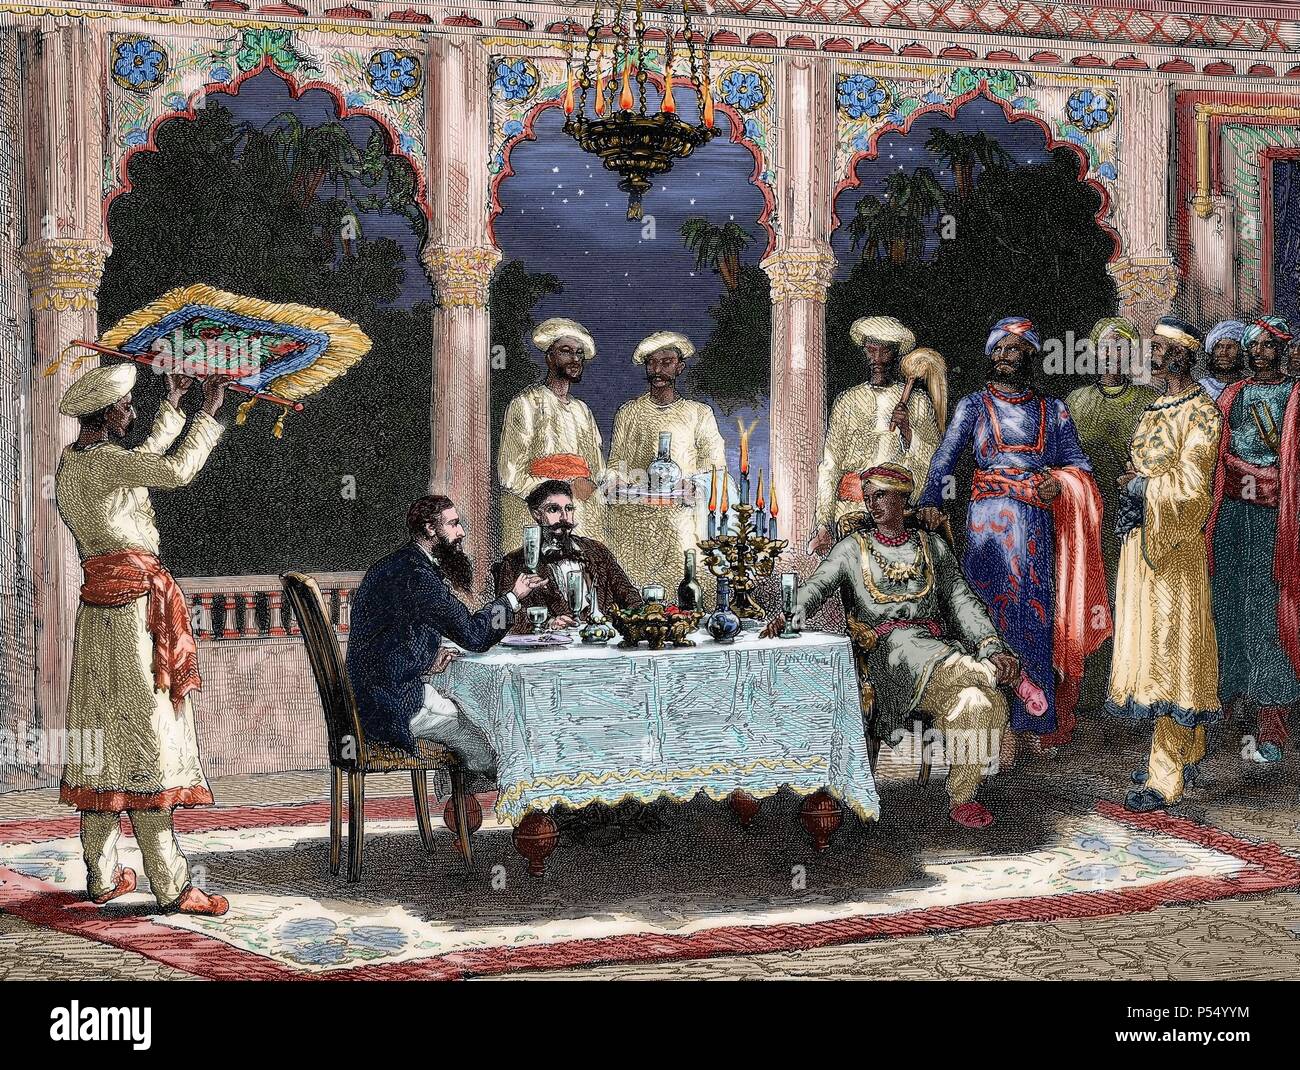 India. British colonial era. Banquet at the palace of Rais in Mynere. Engraving by Hildibrand. Colored. 'The Illustrated World', 1882. Stock Photo